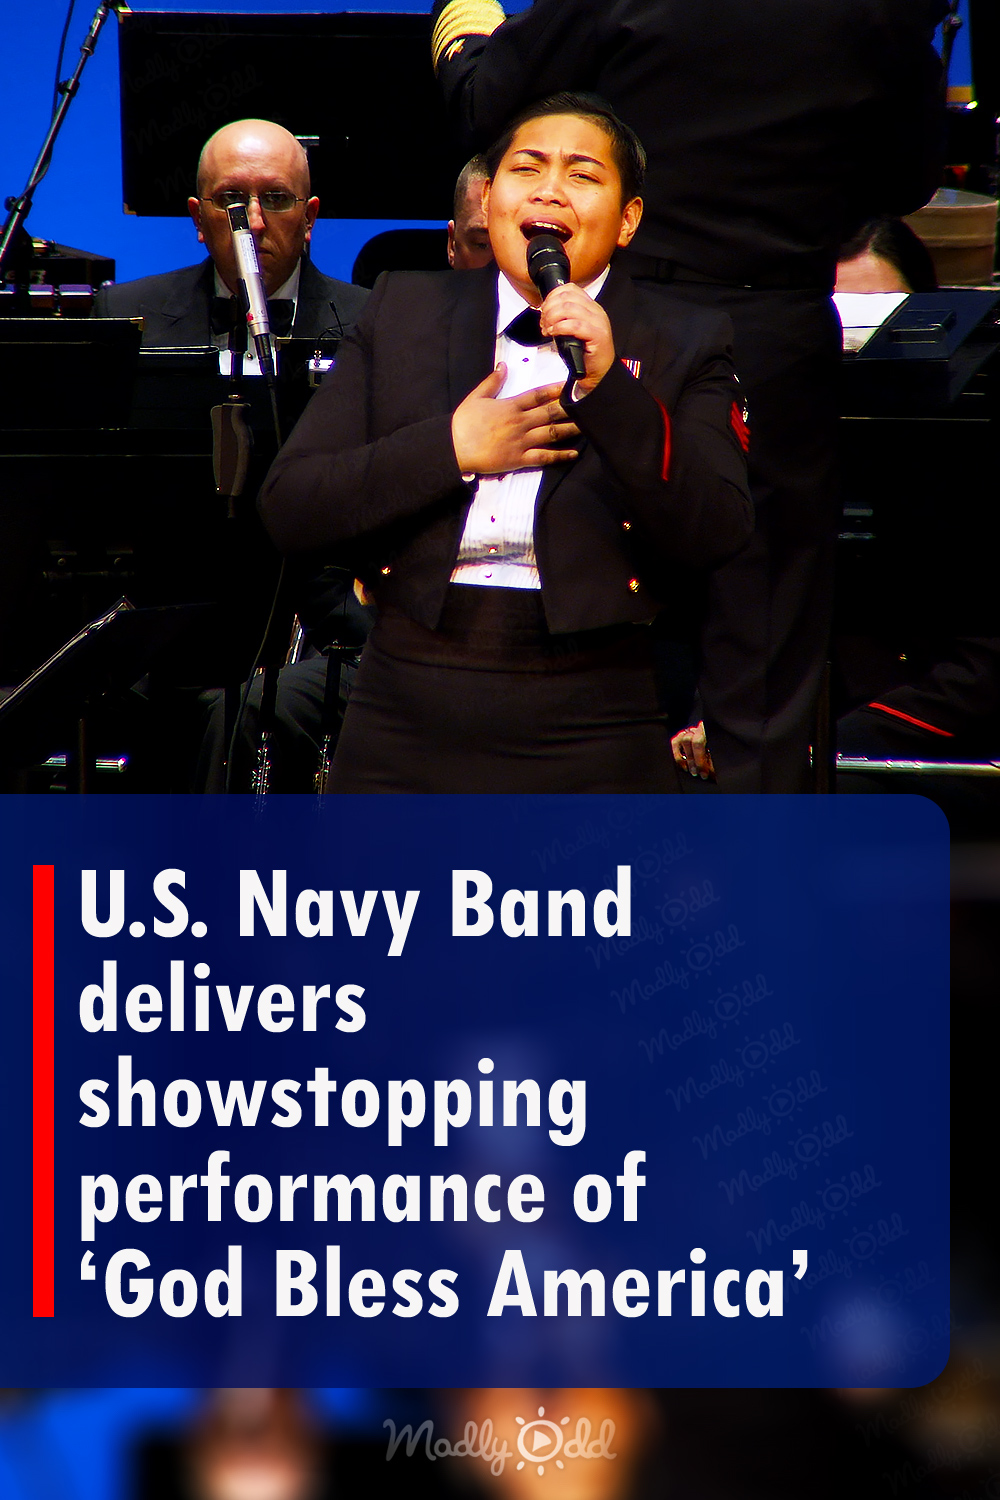 U.S. Navy Band delivers showstopping performance of ‘God Bless America’